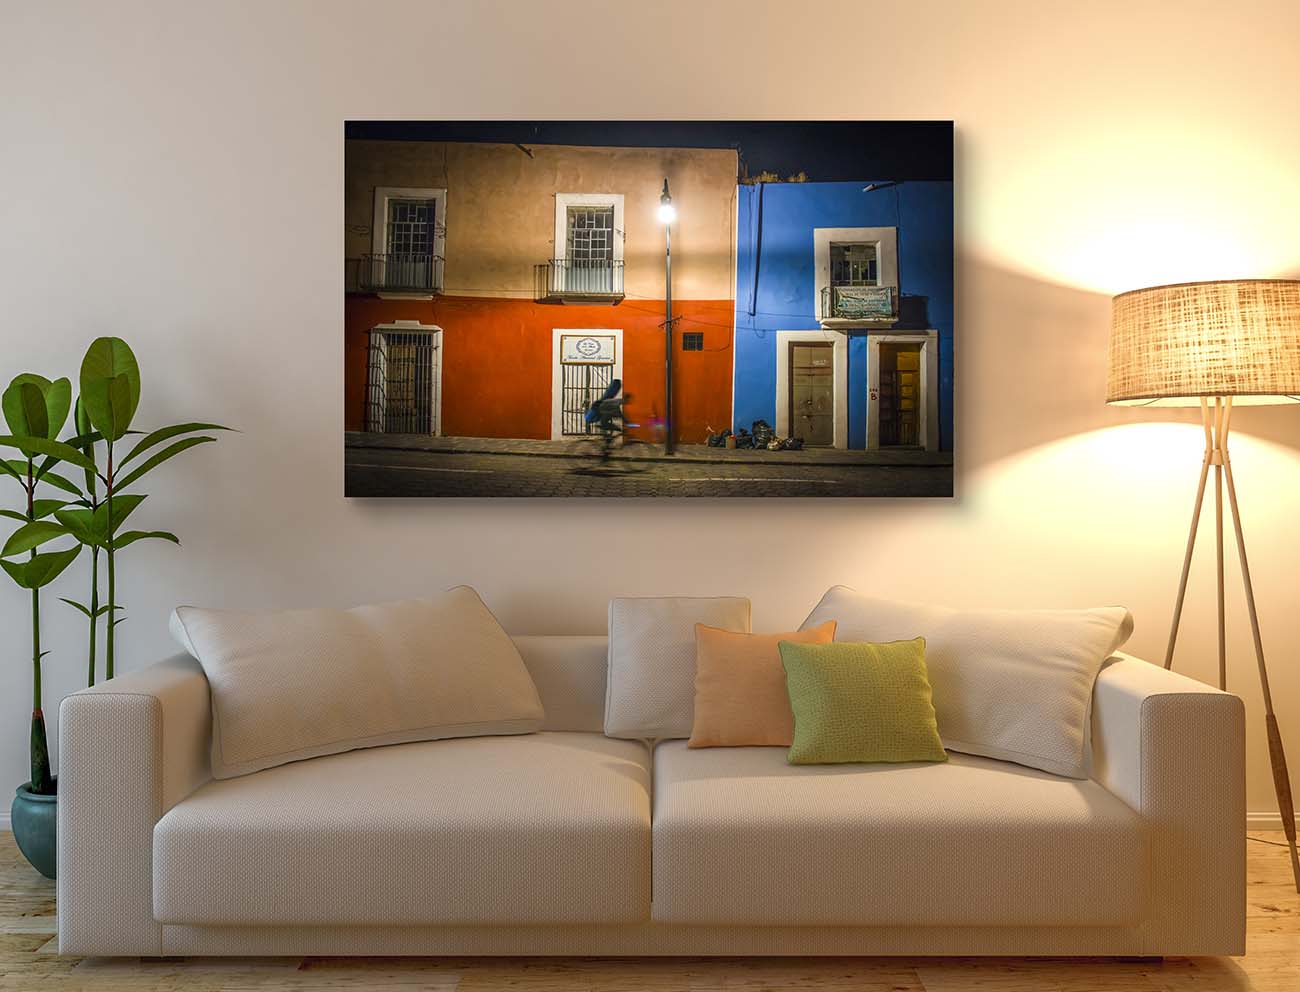 Guitar Shop Cyclist photograph by Doug LaRue large print on a living room wall over a couch